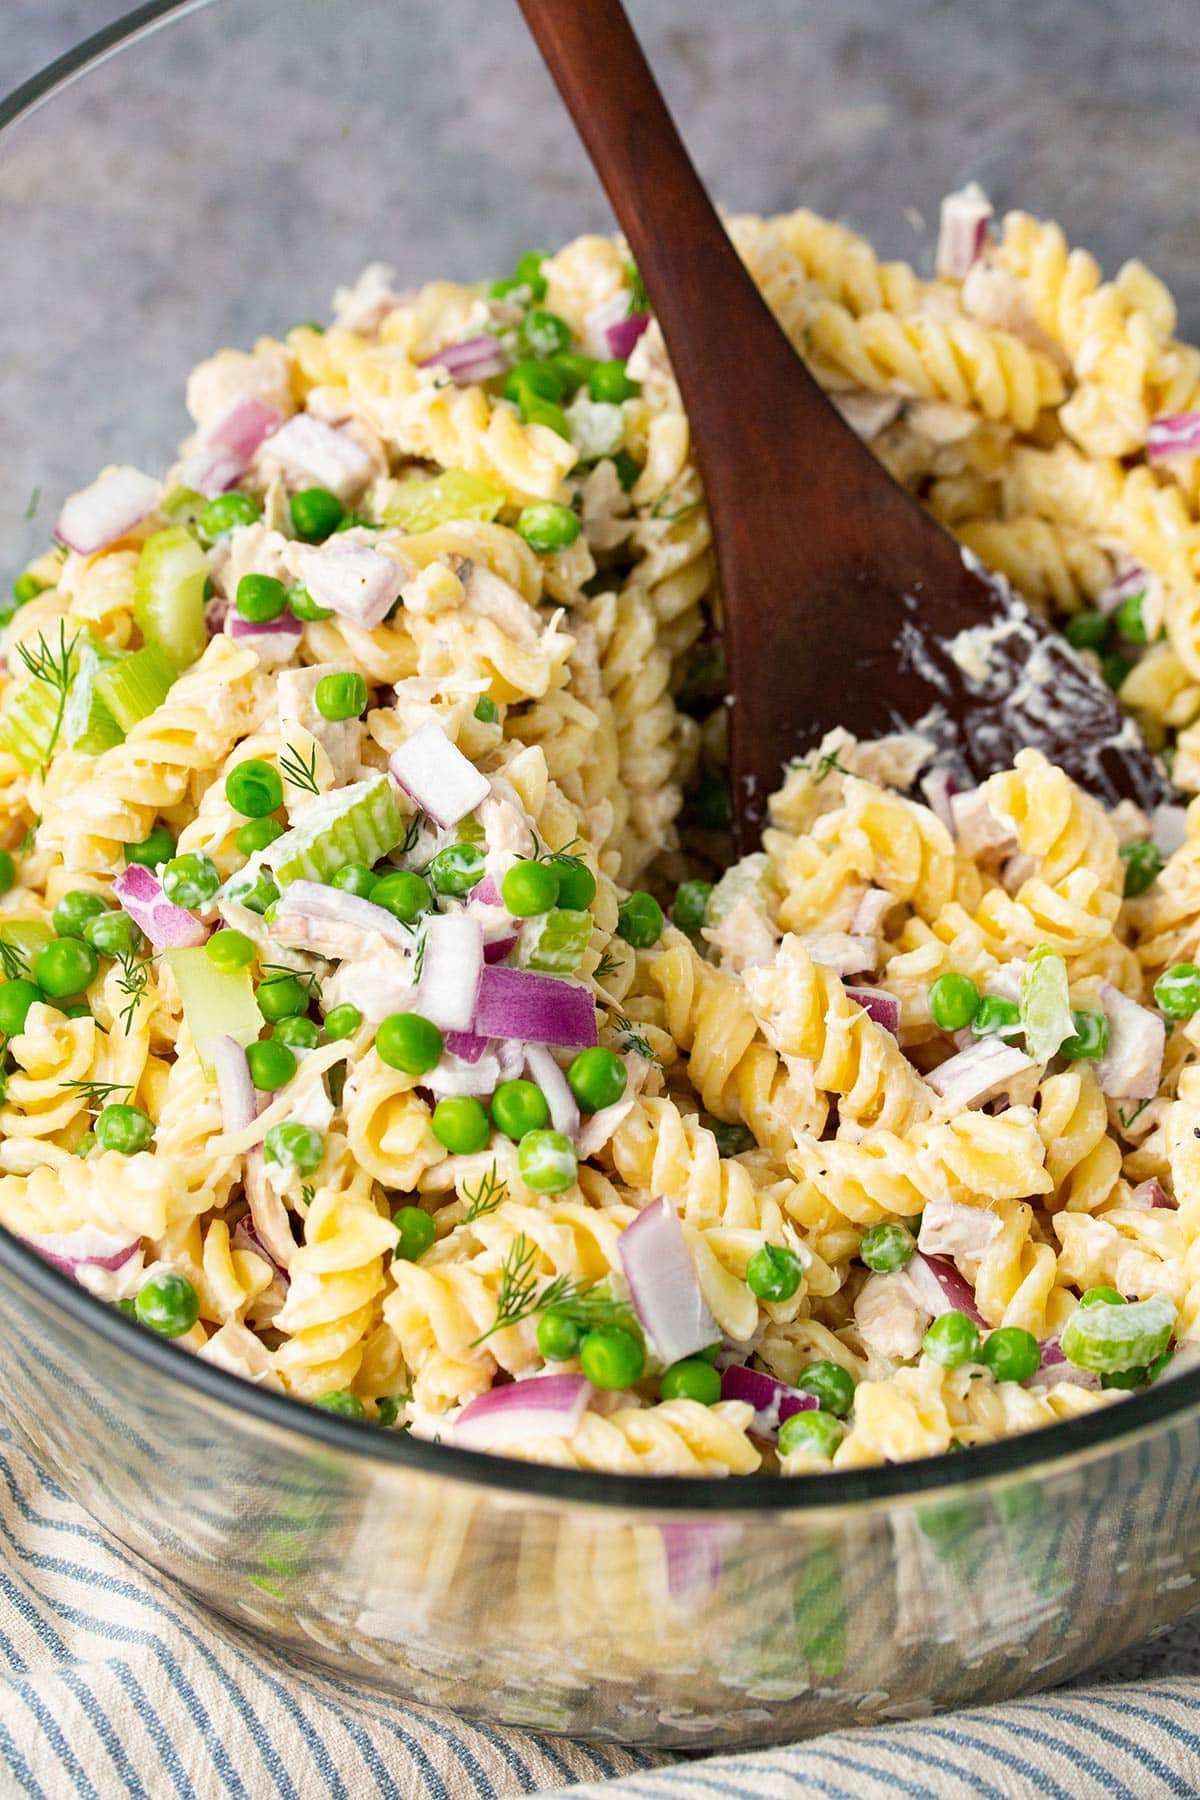 Tuna pasta salad in a large glass mixing bowl.